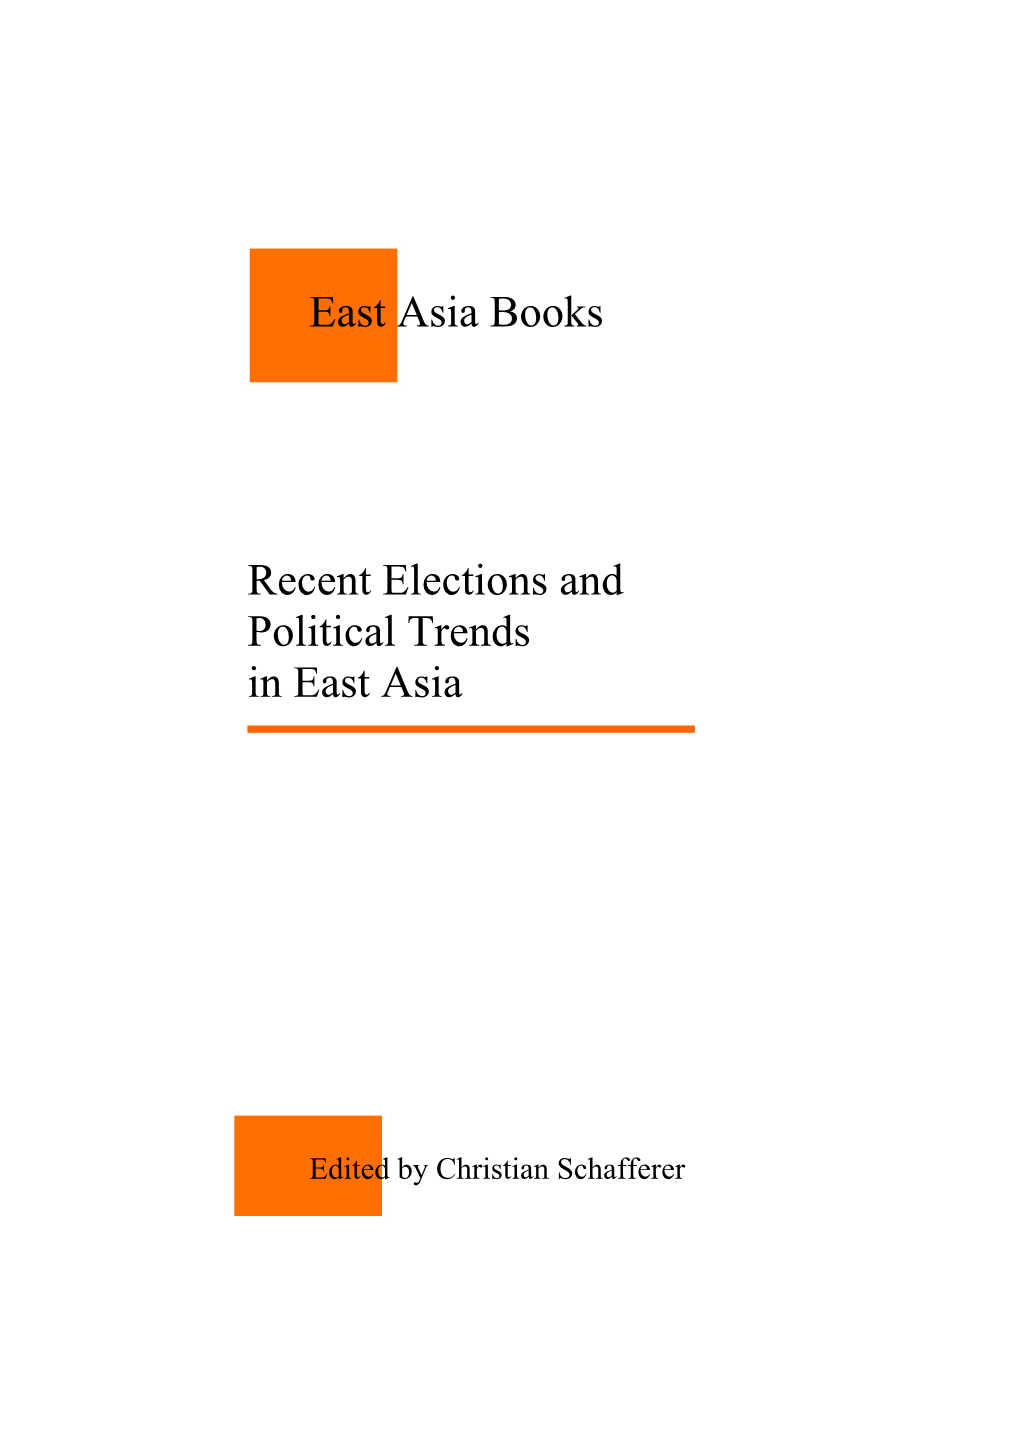 East Asia Books Recent Elections and Political Trends in East Asia